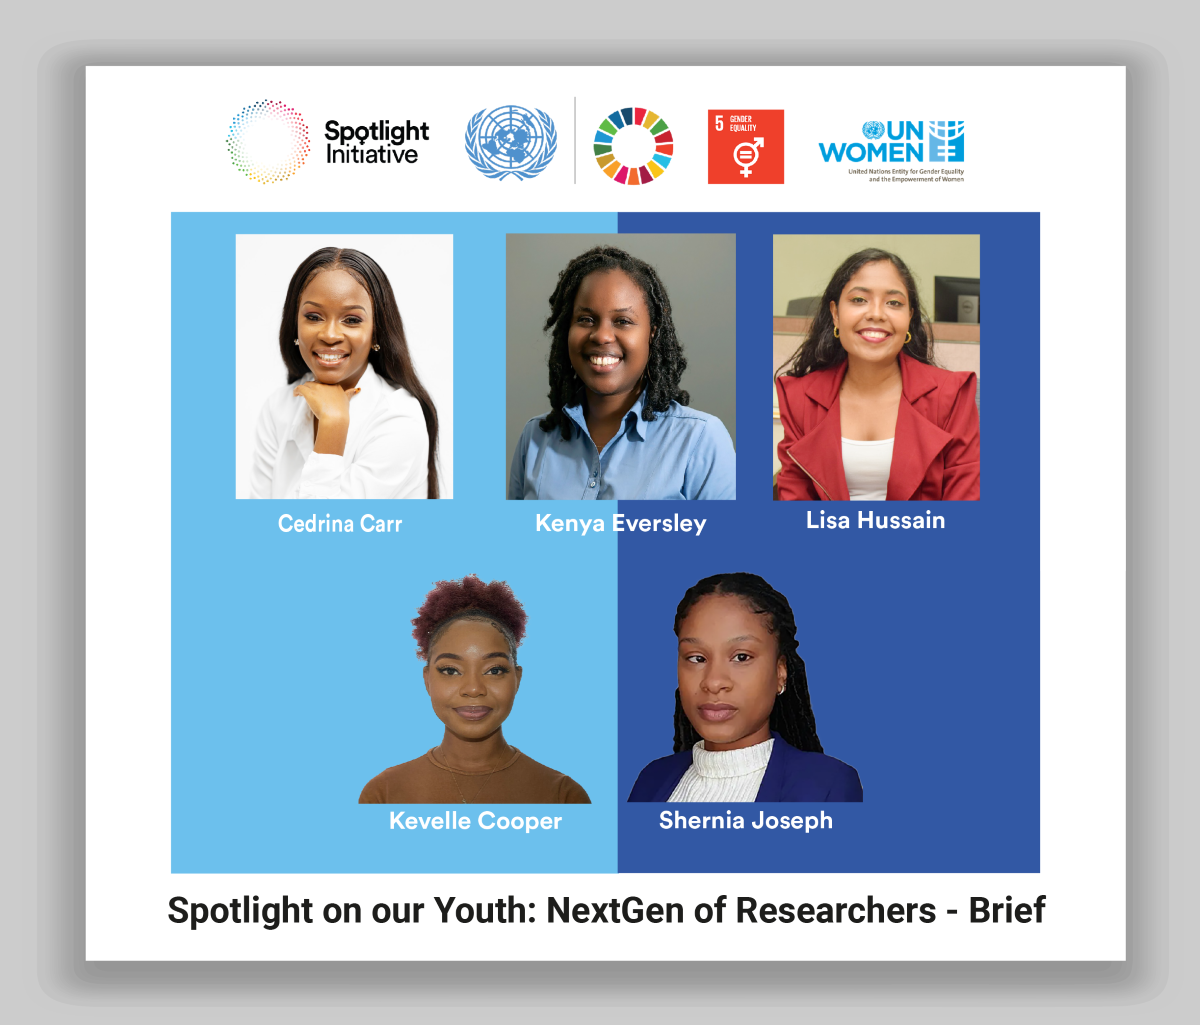 Spotlight on our Youth: the next generation of researchers